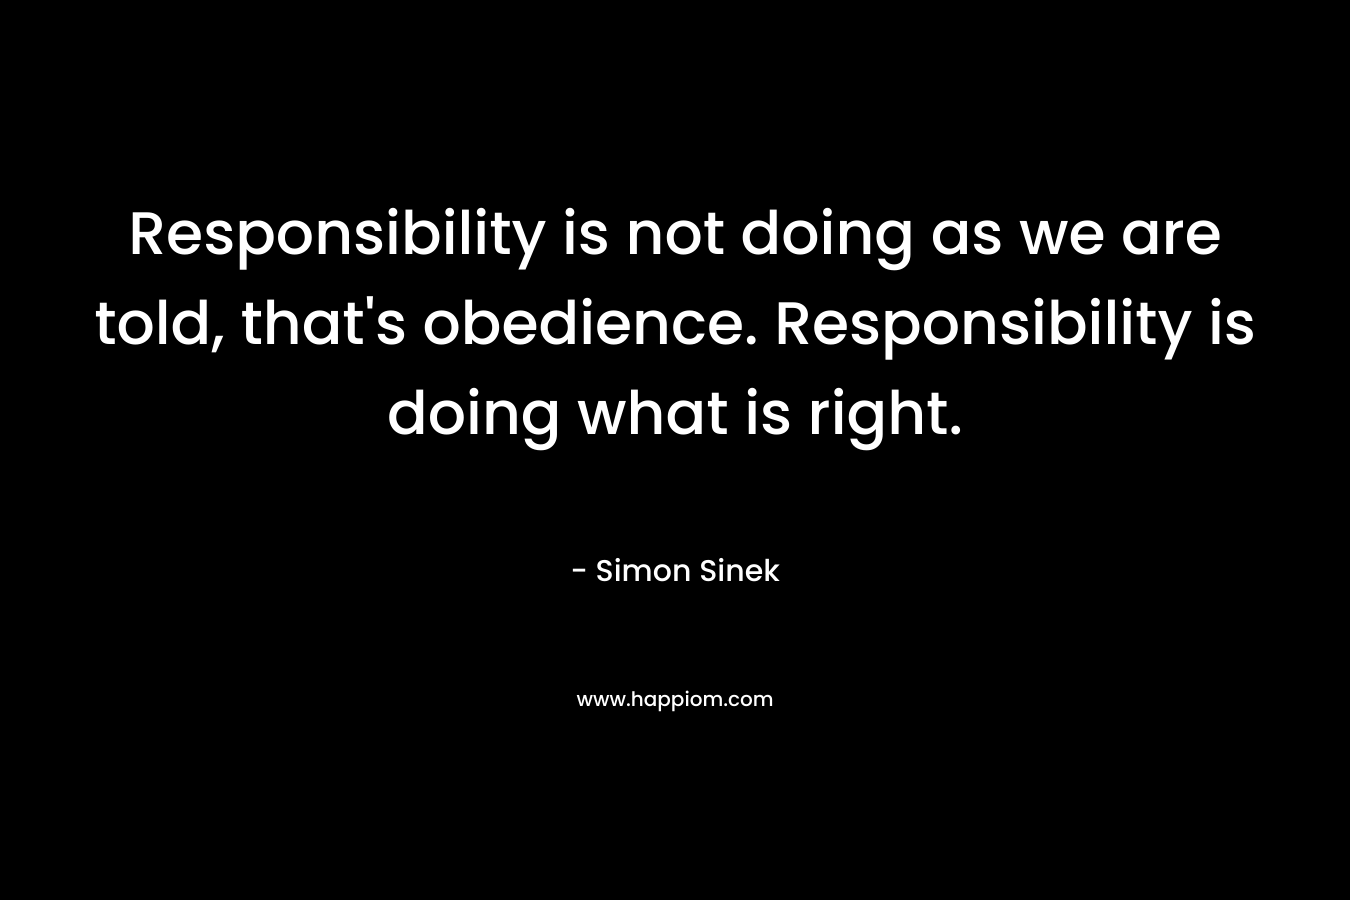 Responsibility is not doing as we are told, that’s obedience. Responsibility is doing what is right. – Simon Sinek